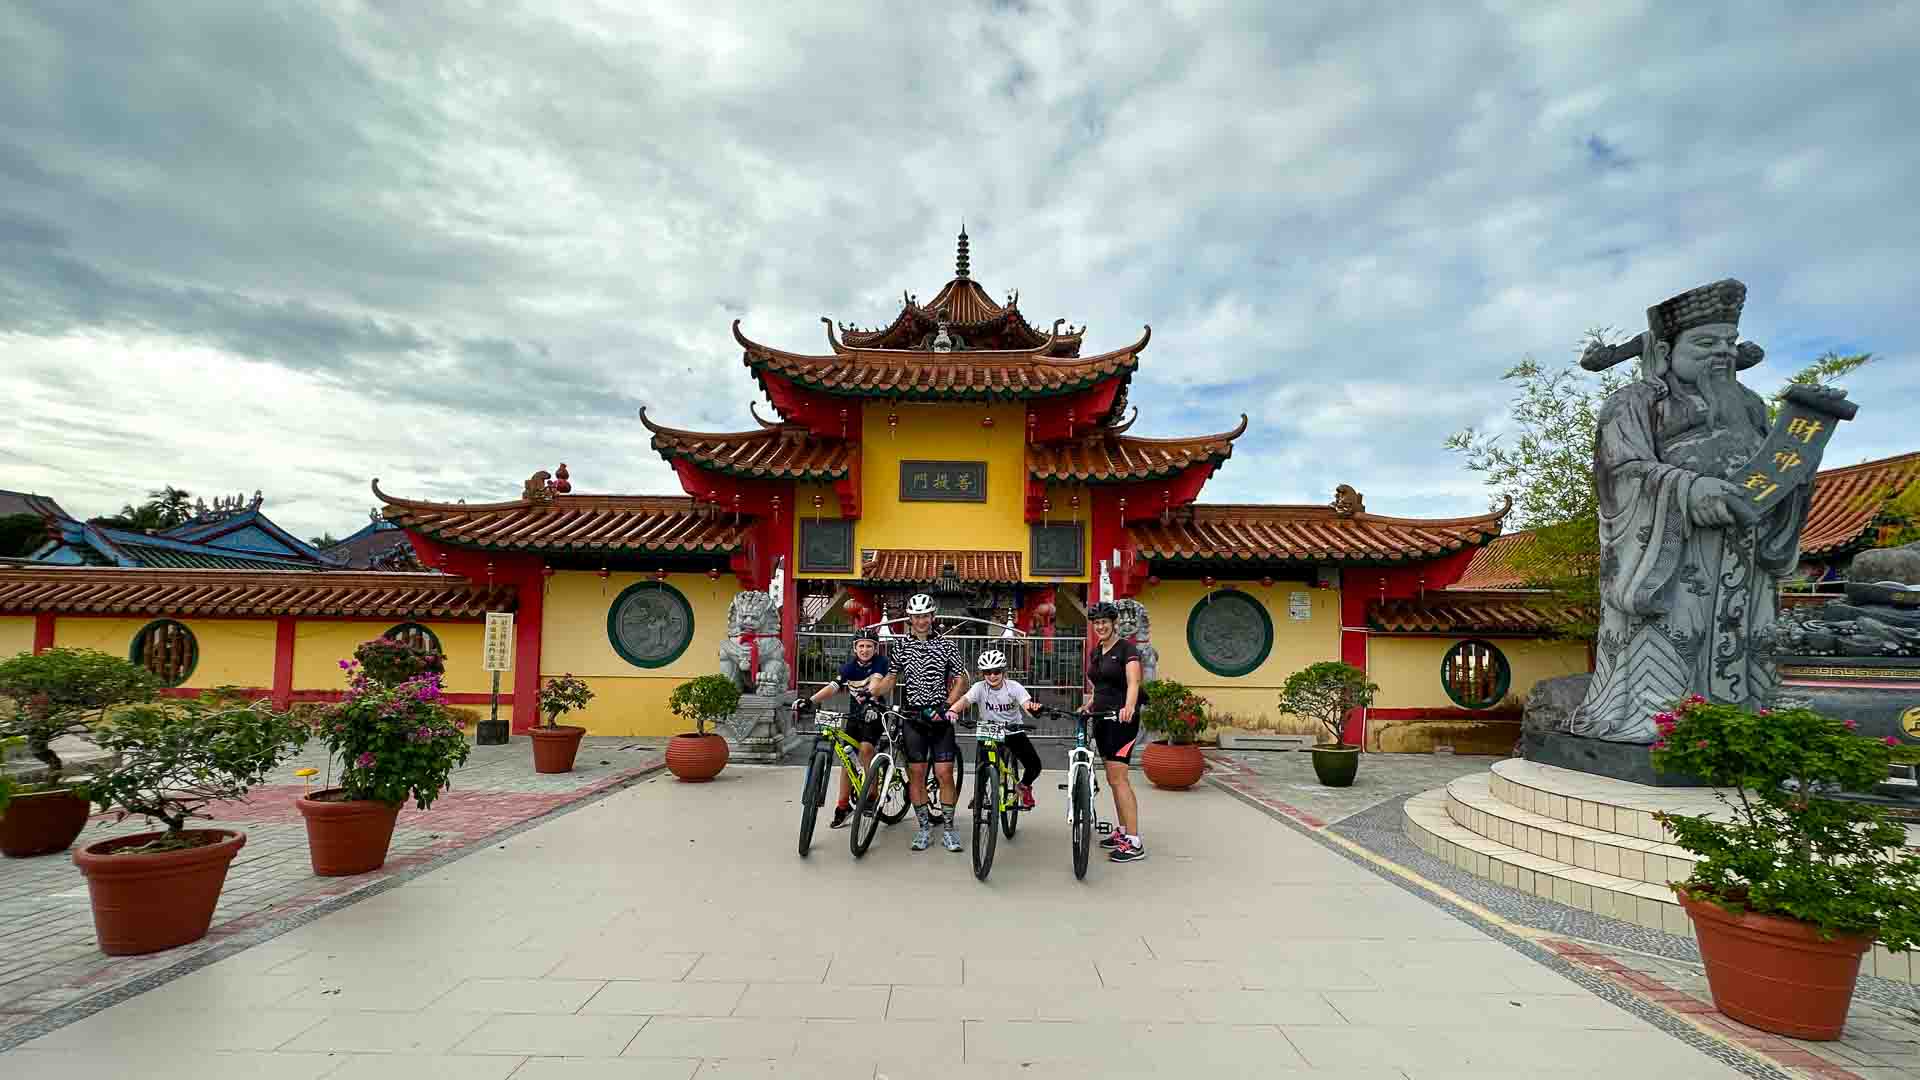 Temple in Borneo with cyclists standing outside